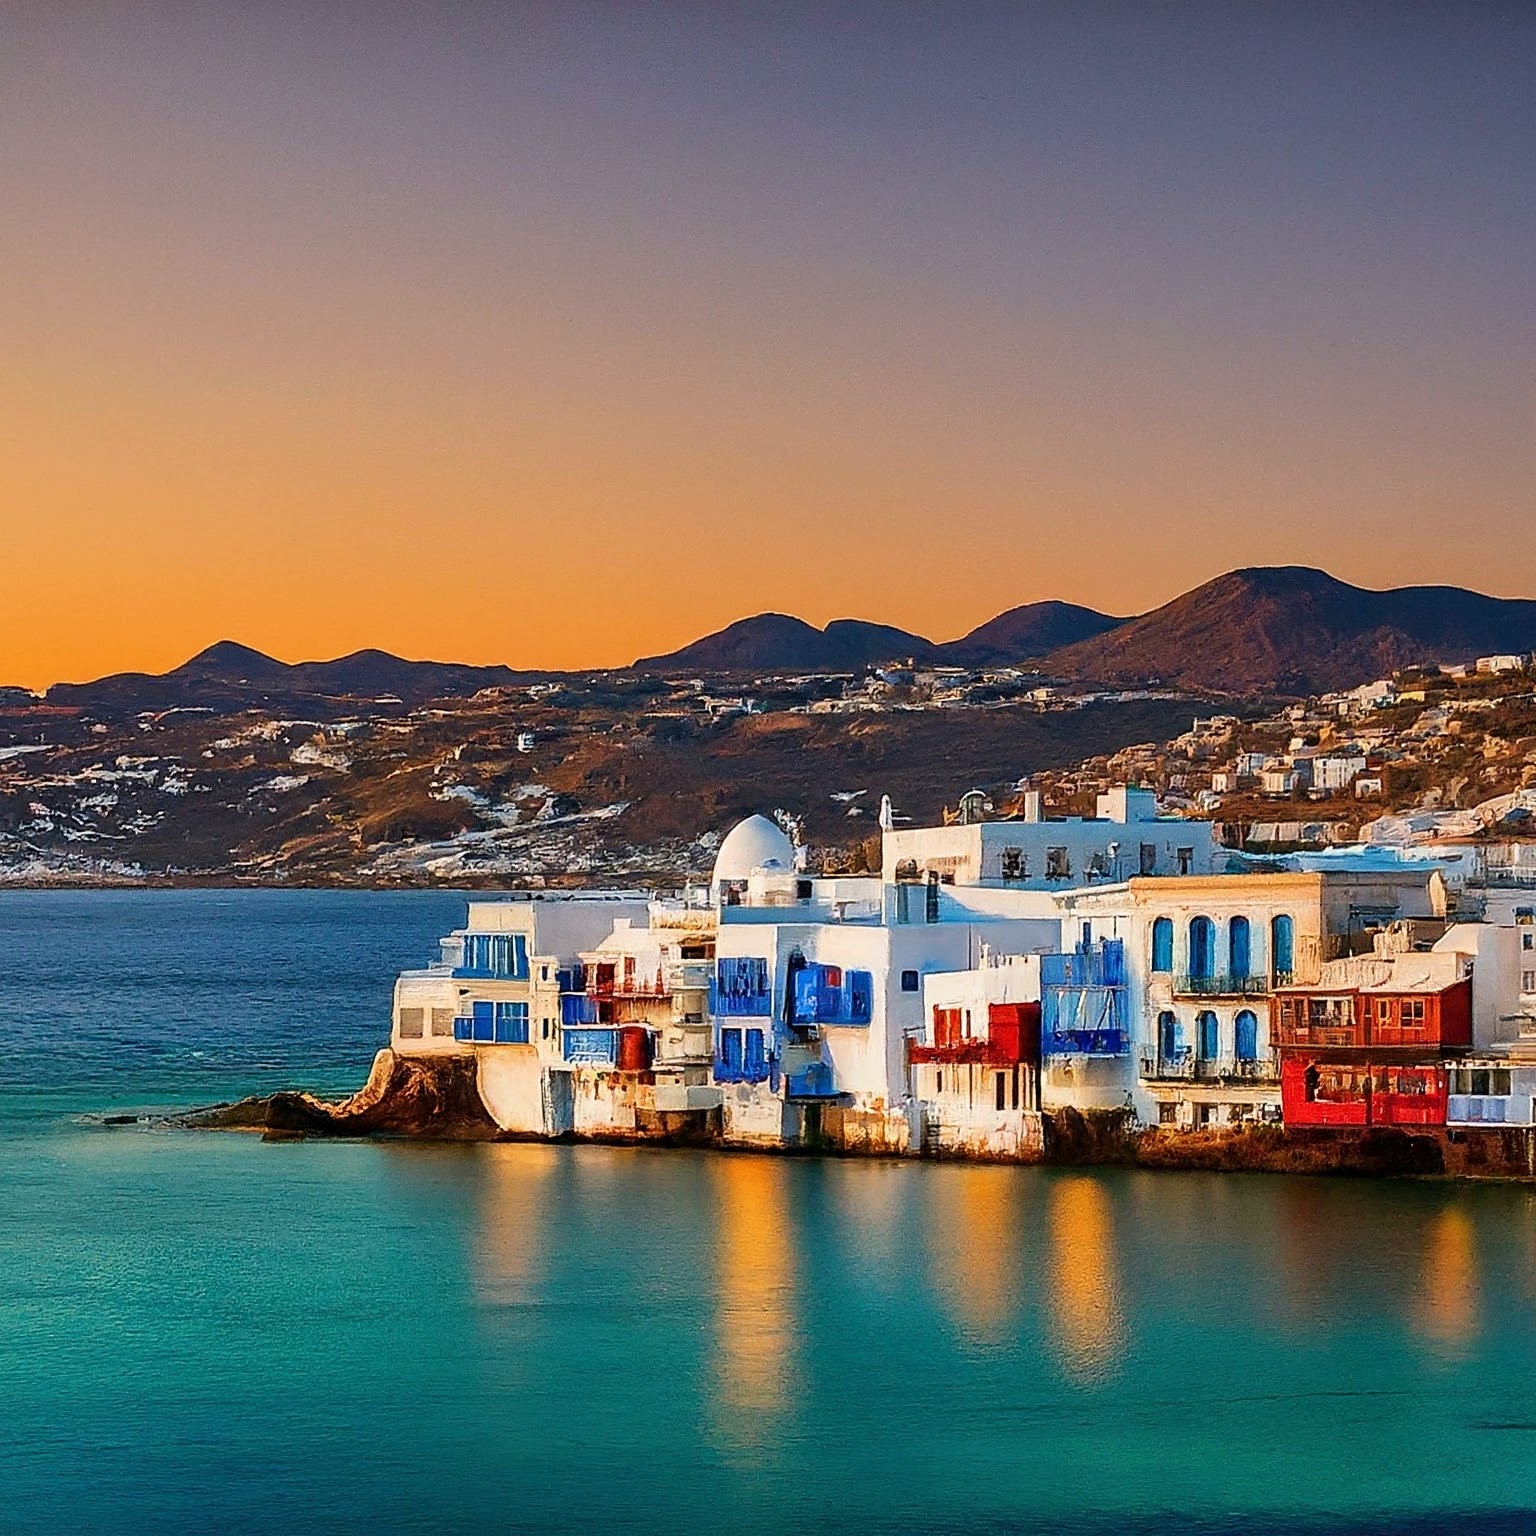 Mykonos town, Greece, at sunset with whitewashed houses, colorful balconies, and a harbor.